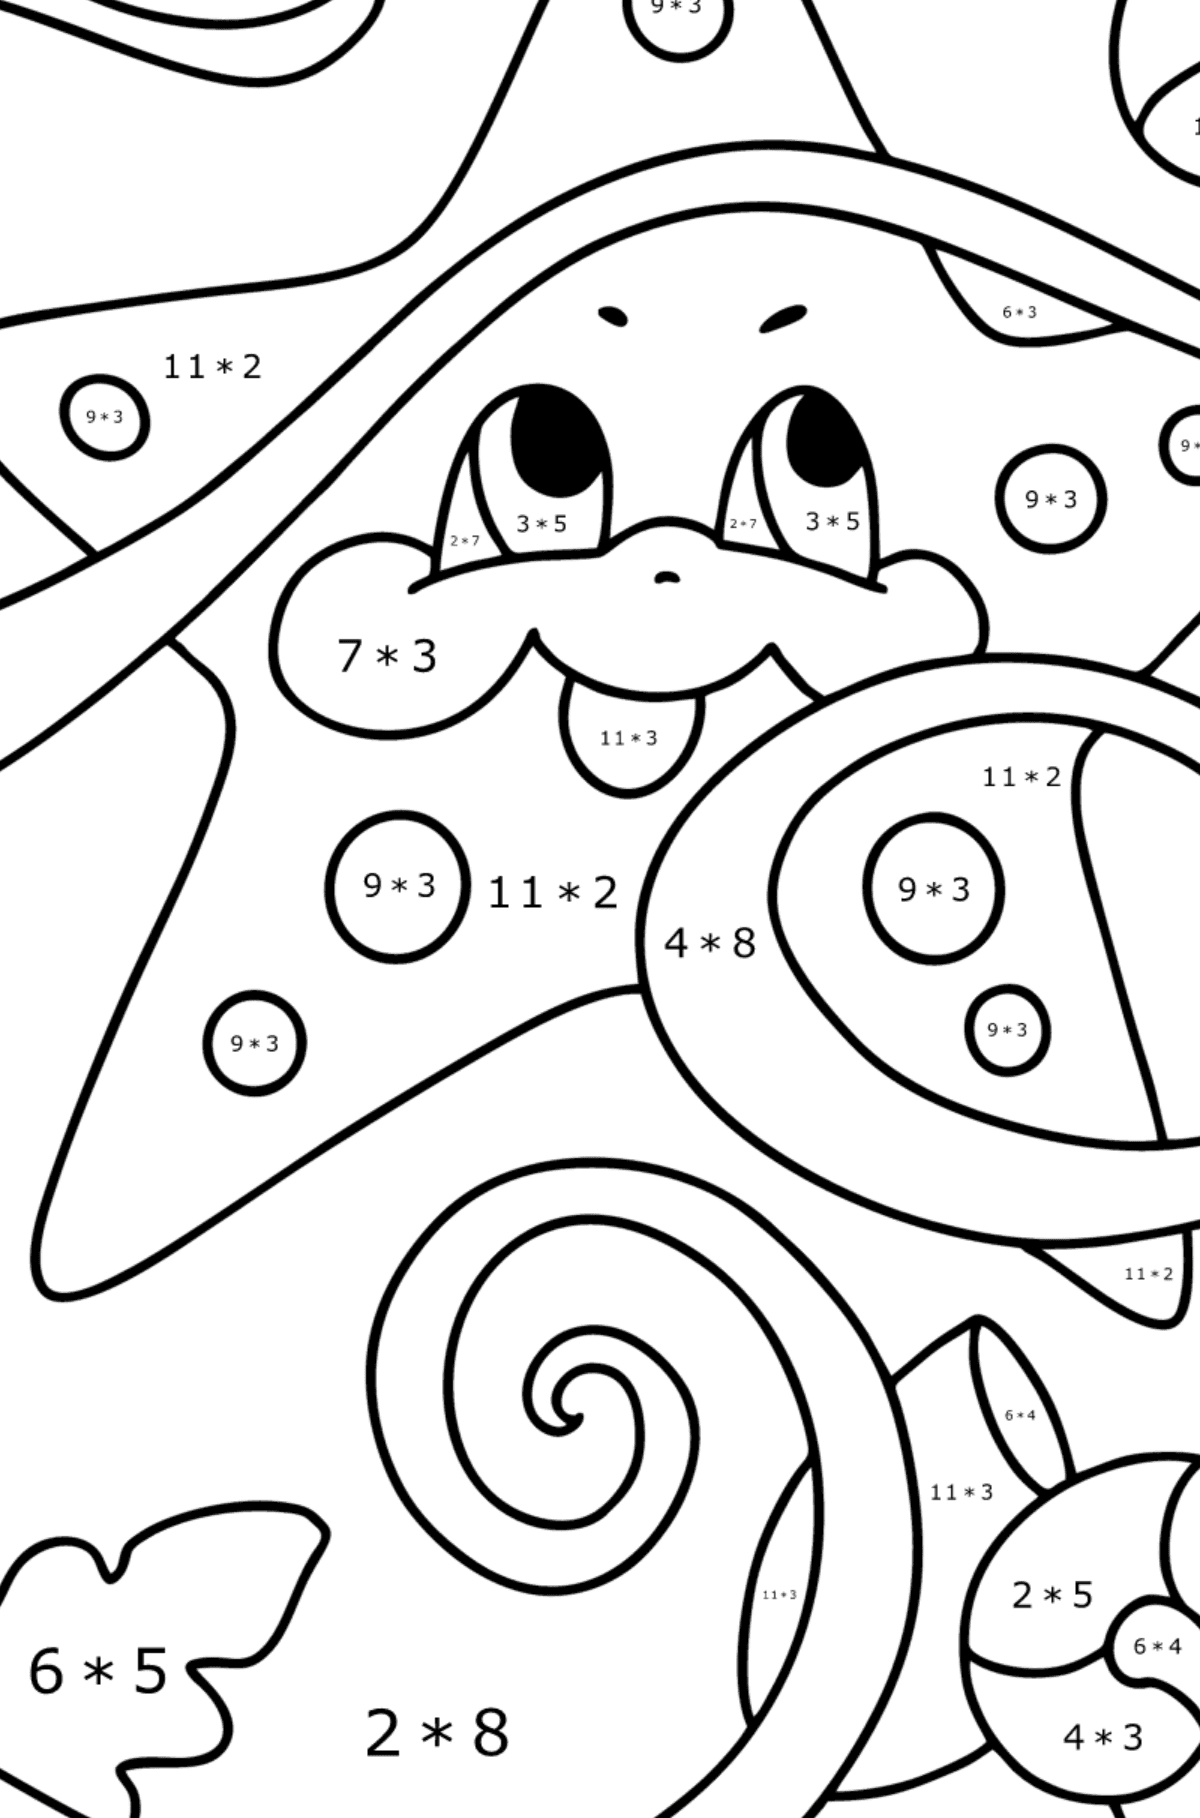 Baby starfish coloring page - Math Coloring - Multiplication for Kids